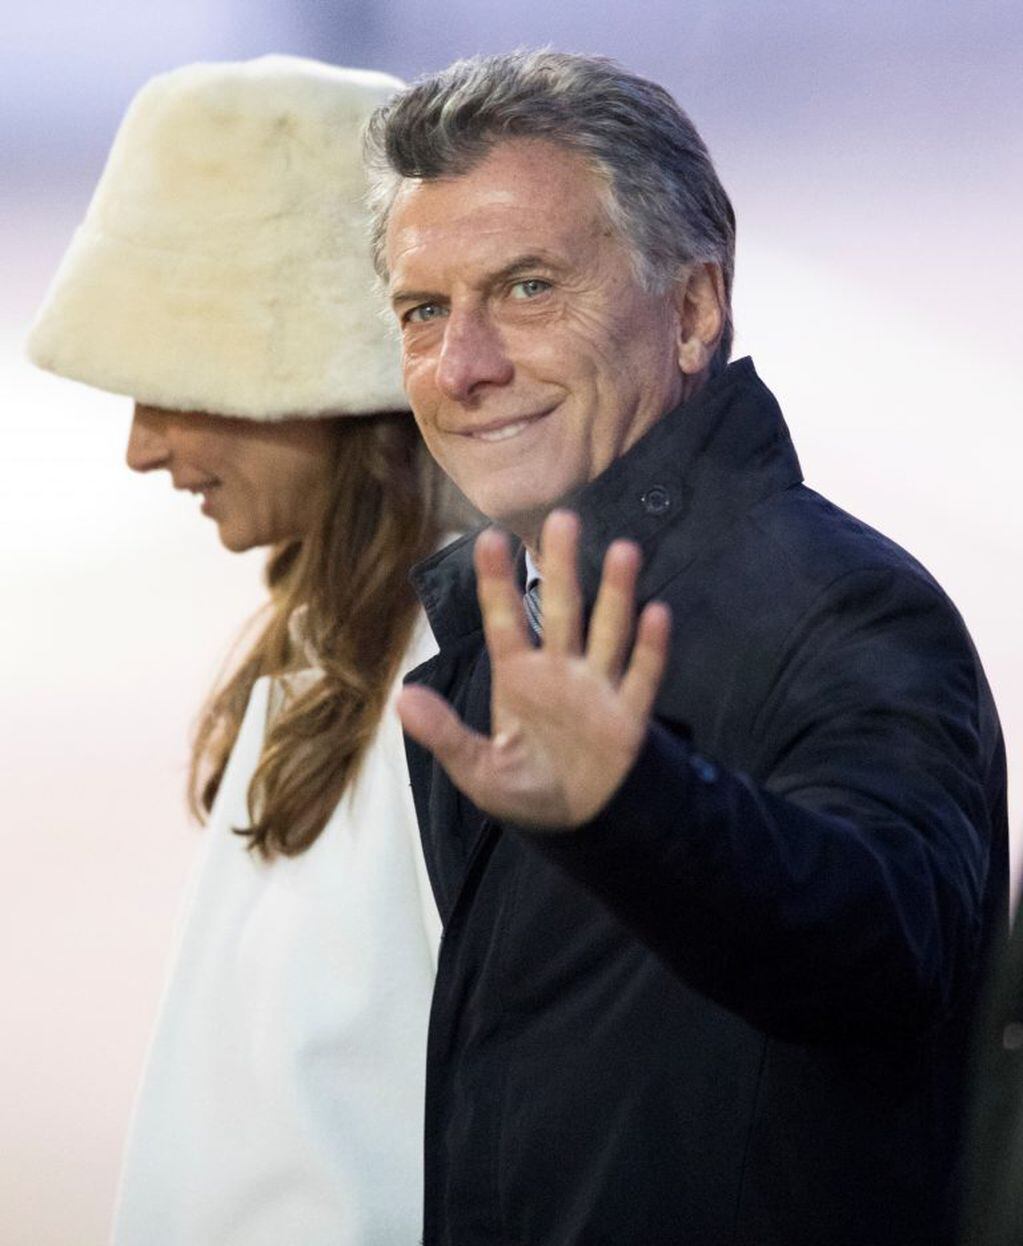 Argentina's President Mauricio Macri and his wife Juliana Awada arrive at the Vnukovo Government Airport for official visit to Russia in Moscow, Russia, Monday, Jan. 22, 2018. (AP Photo/Pavel Golovkin)